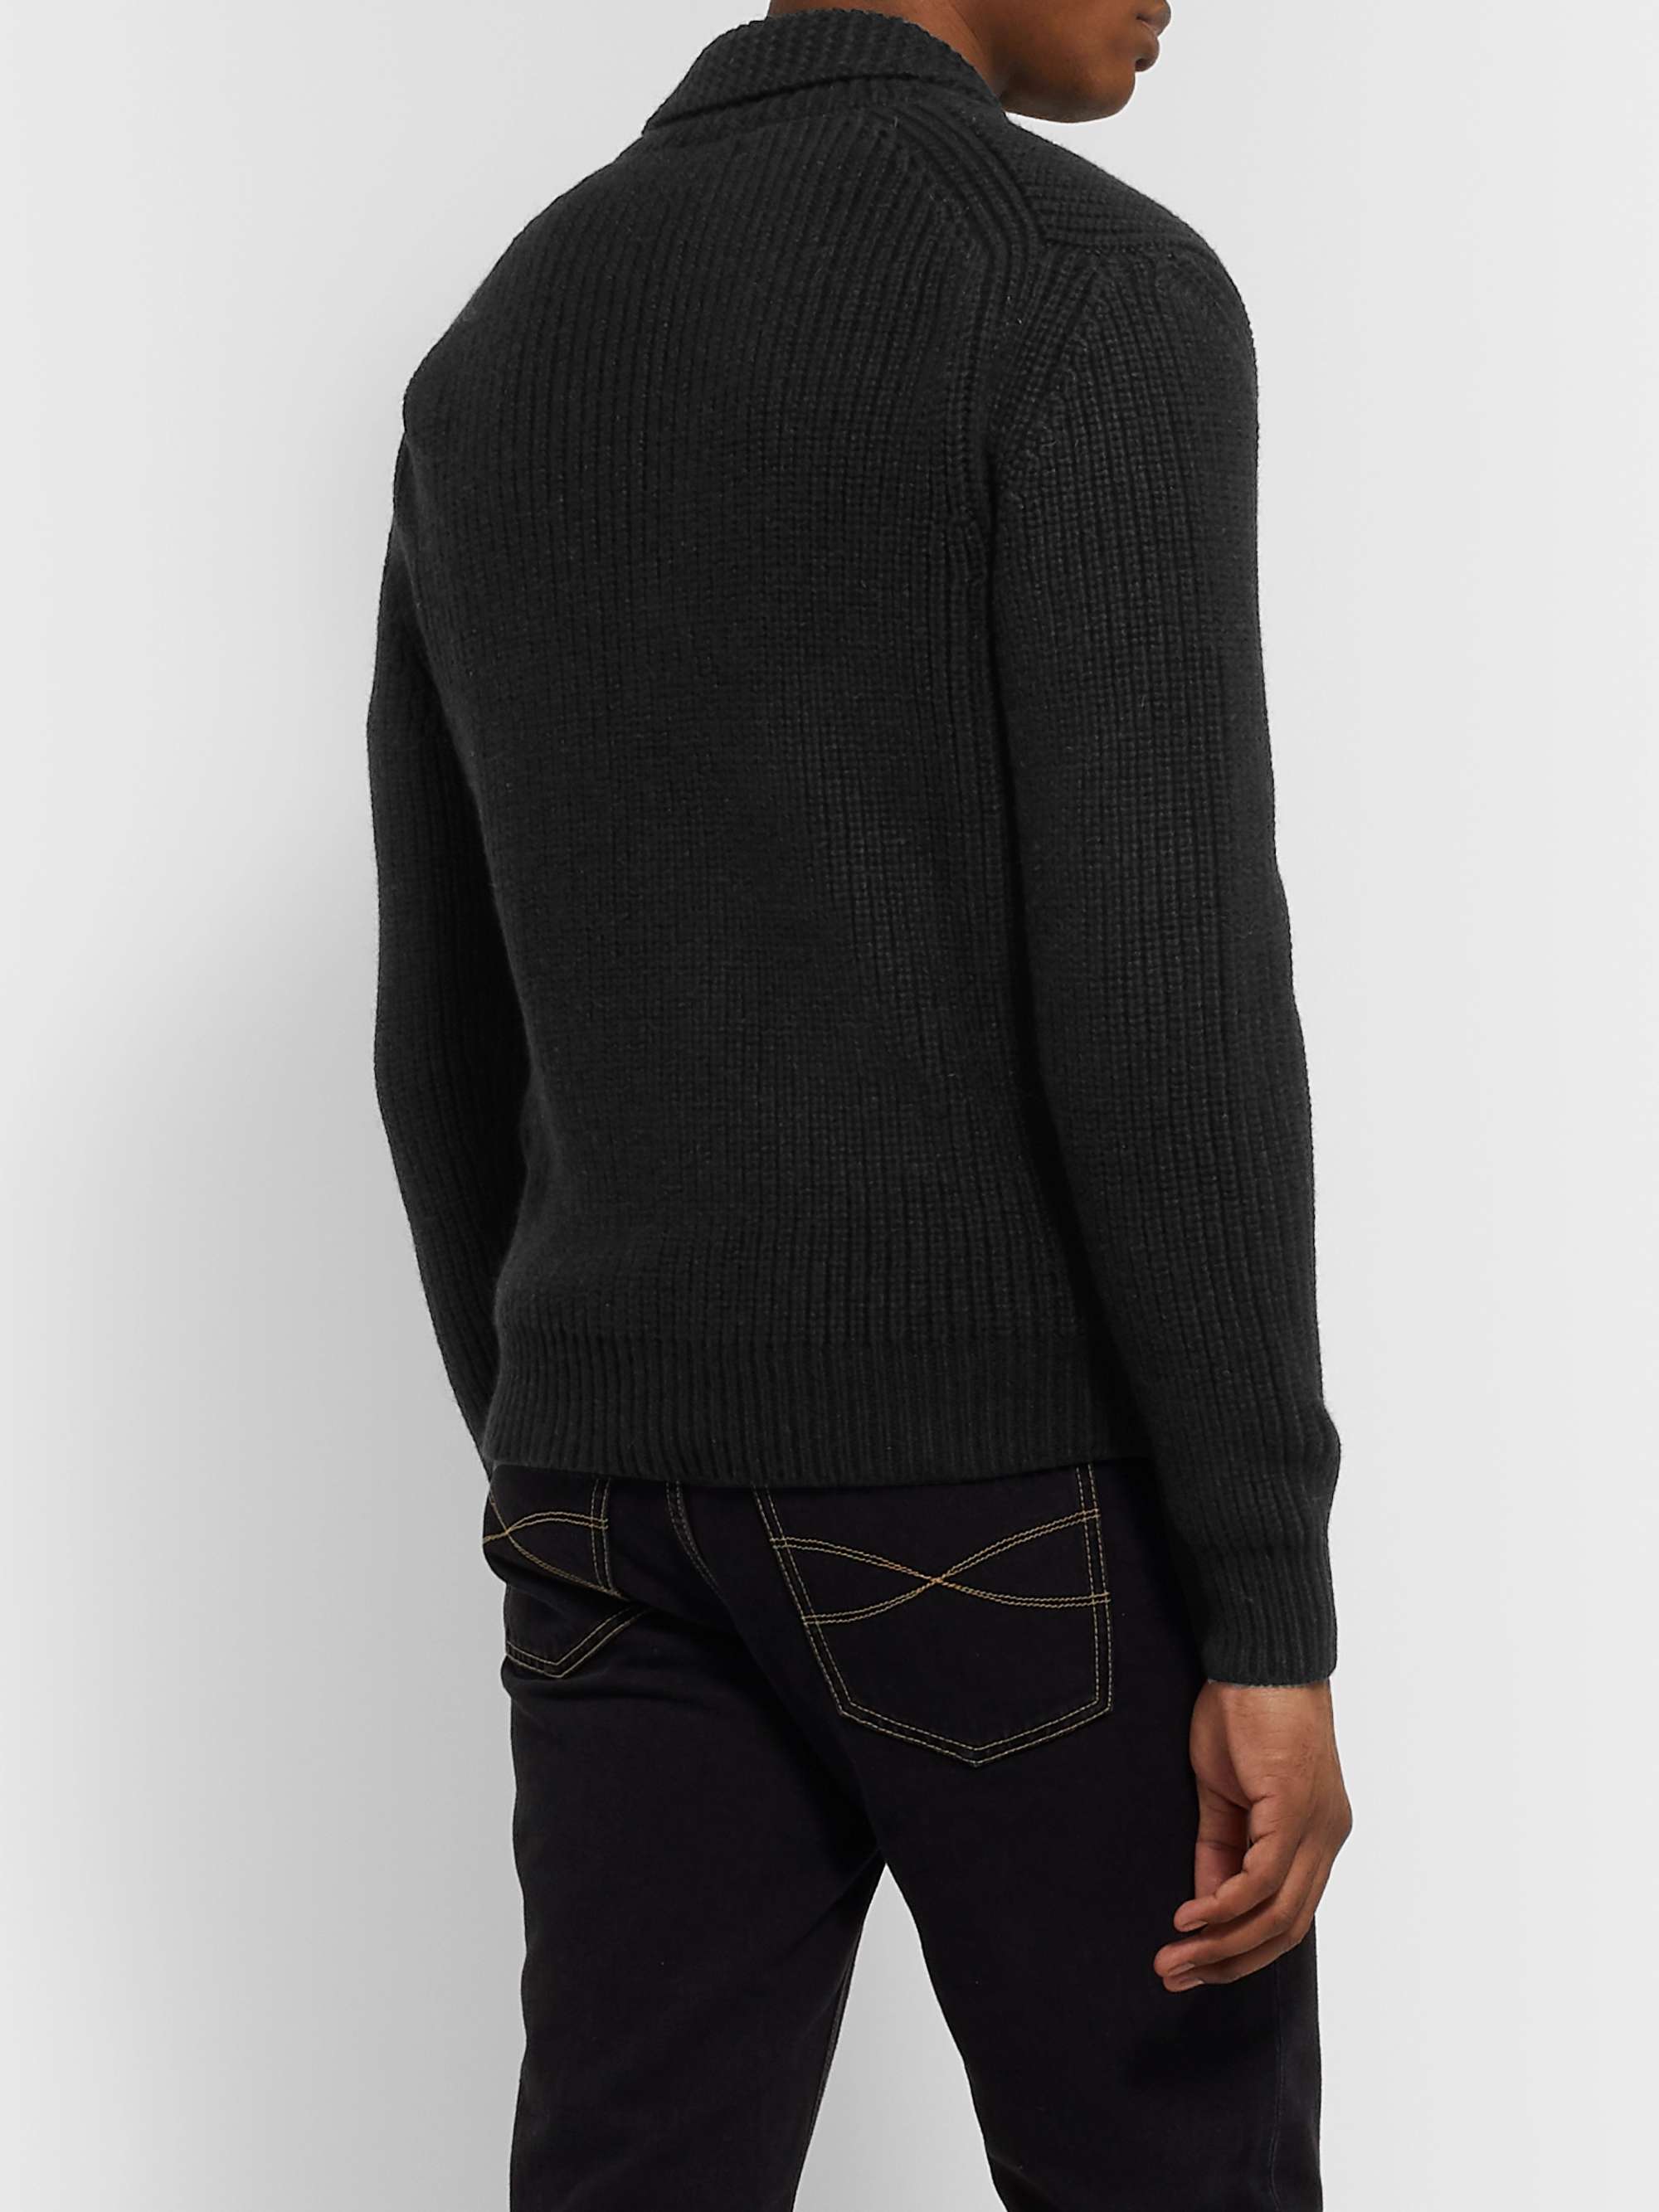 TOM FORD Shawl-Collar Cable-Knit Cashmere and Mohair-Blend Cardigan